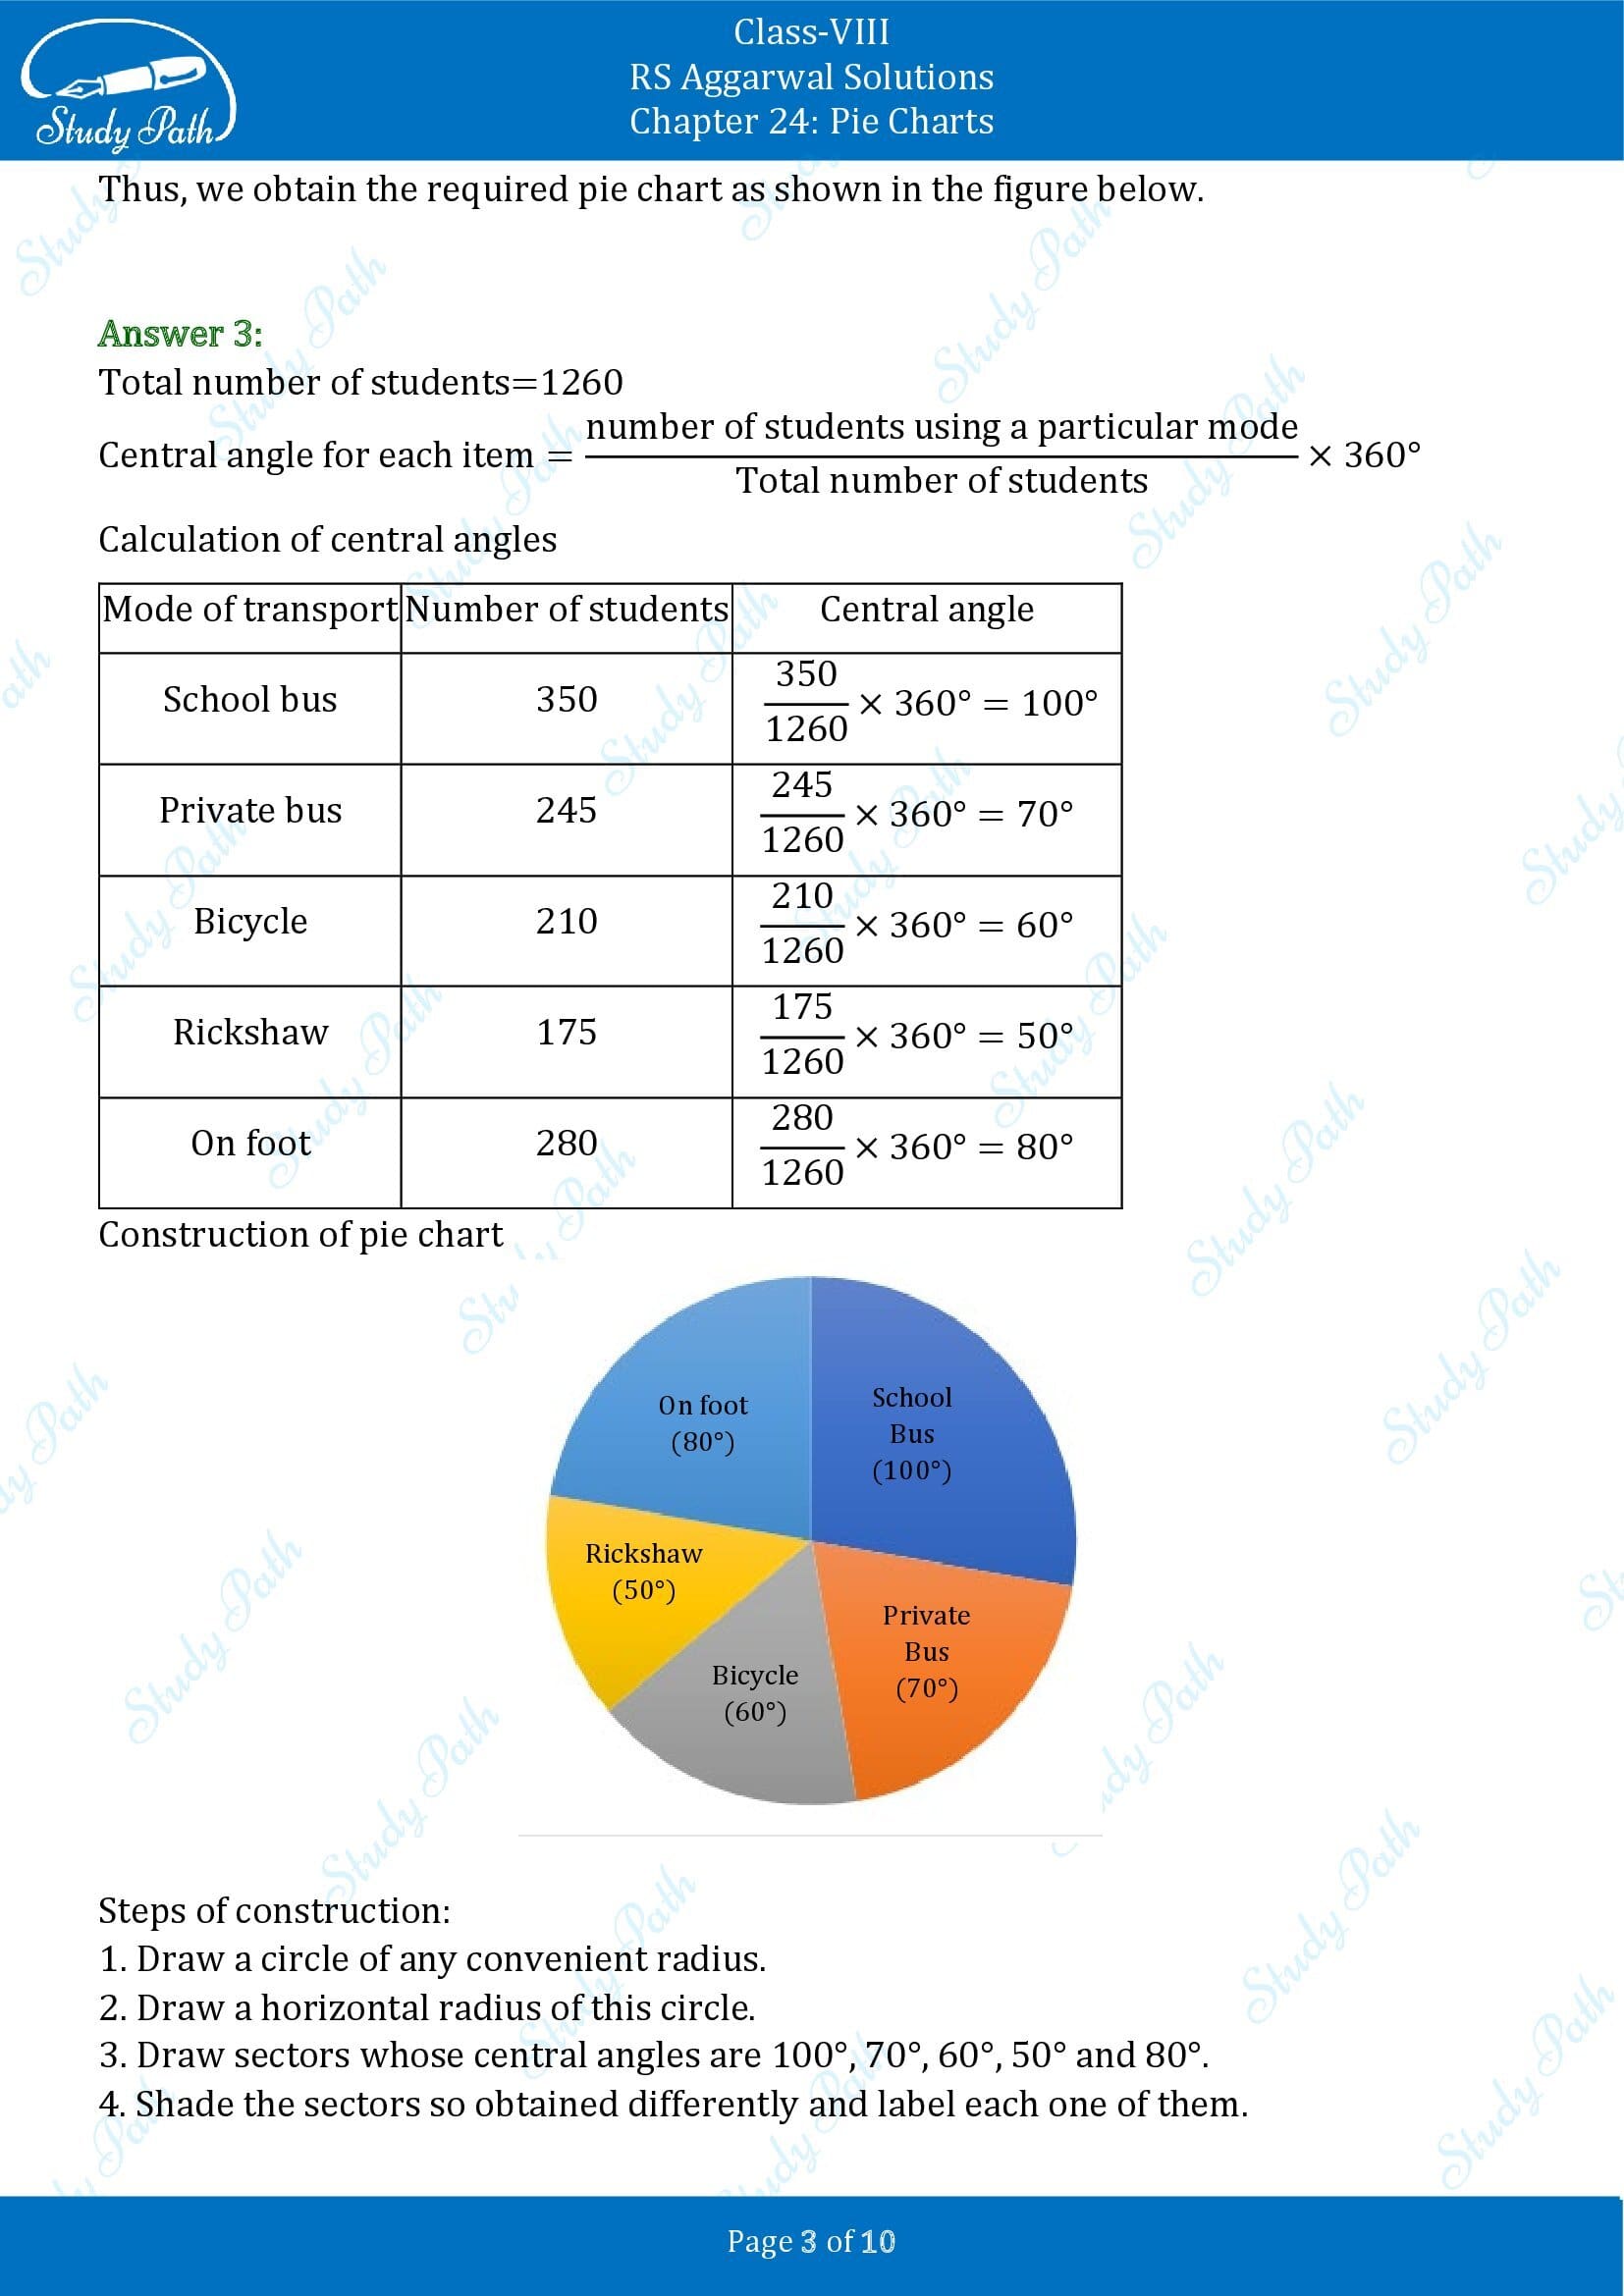 RS Aggarwal Solutions Class 8 Chapter 24 Pie Charts Exercise 24A 00003